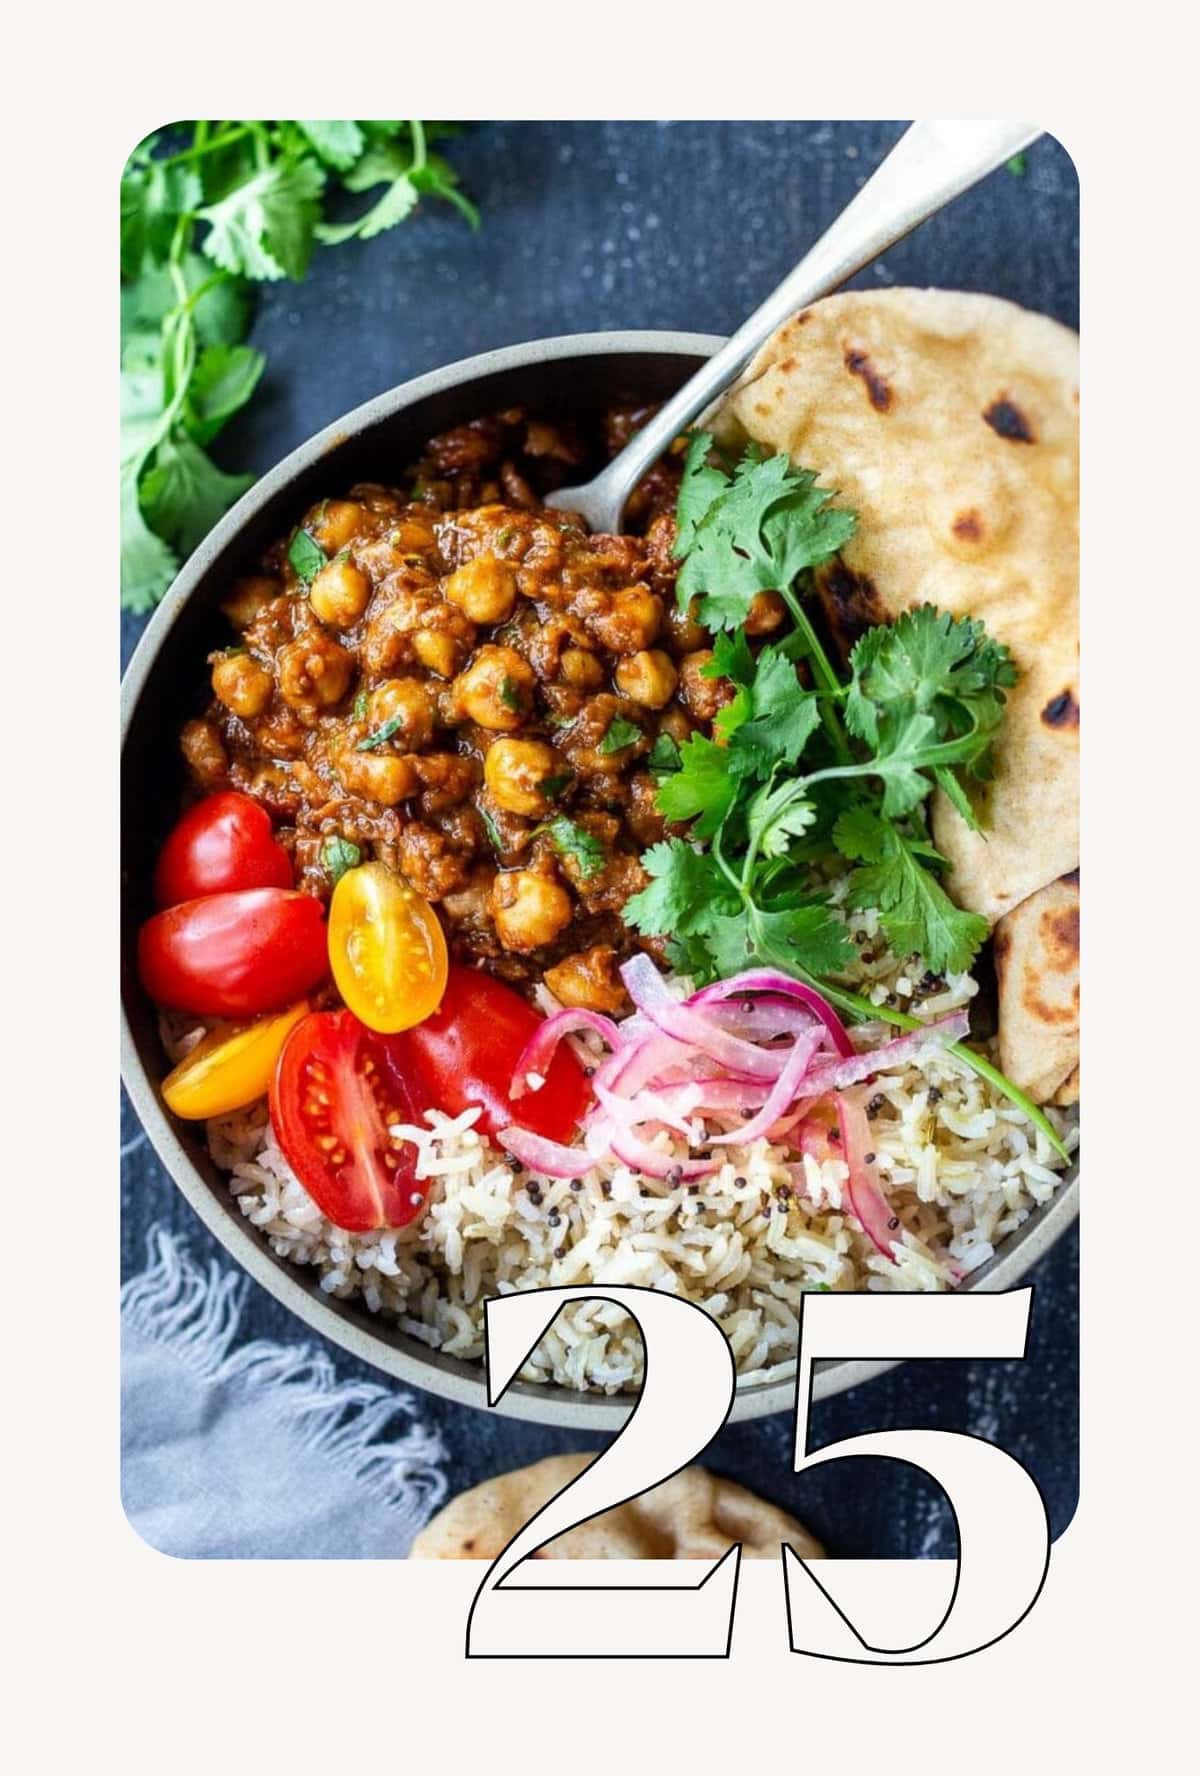 25 Best Chickpea Recipes that are not only easy, mostly vegan (or vegetarian) and full of plant-based protein, they are packed full of delicious flavors from around the globe like India, the Middle East, Morocco, and the Mediterranean. #chickpeas, #garbanzobeans, #chickpearecipes